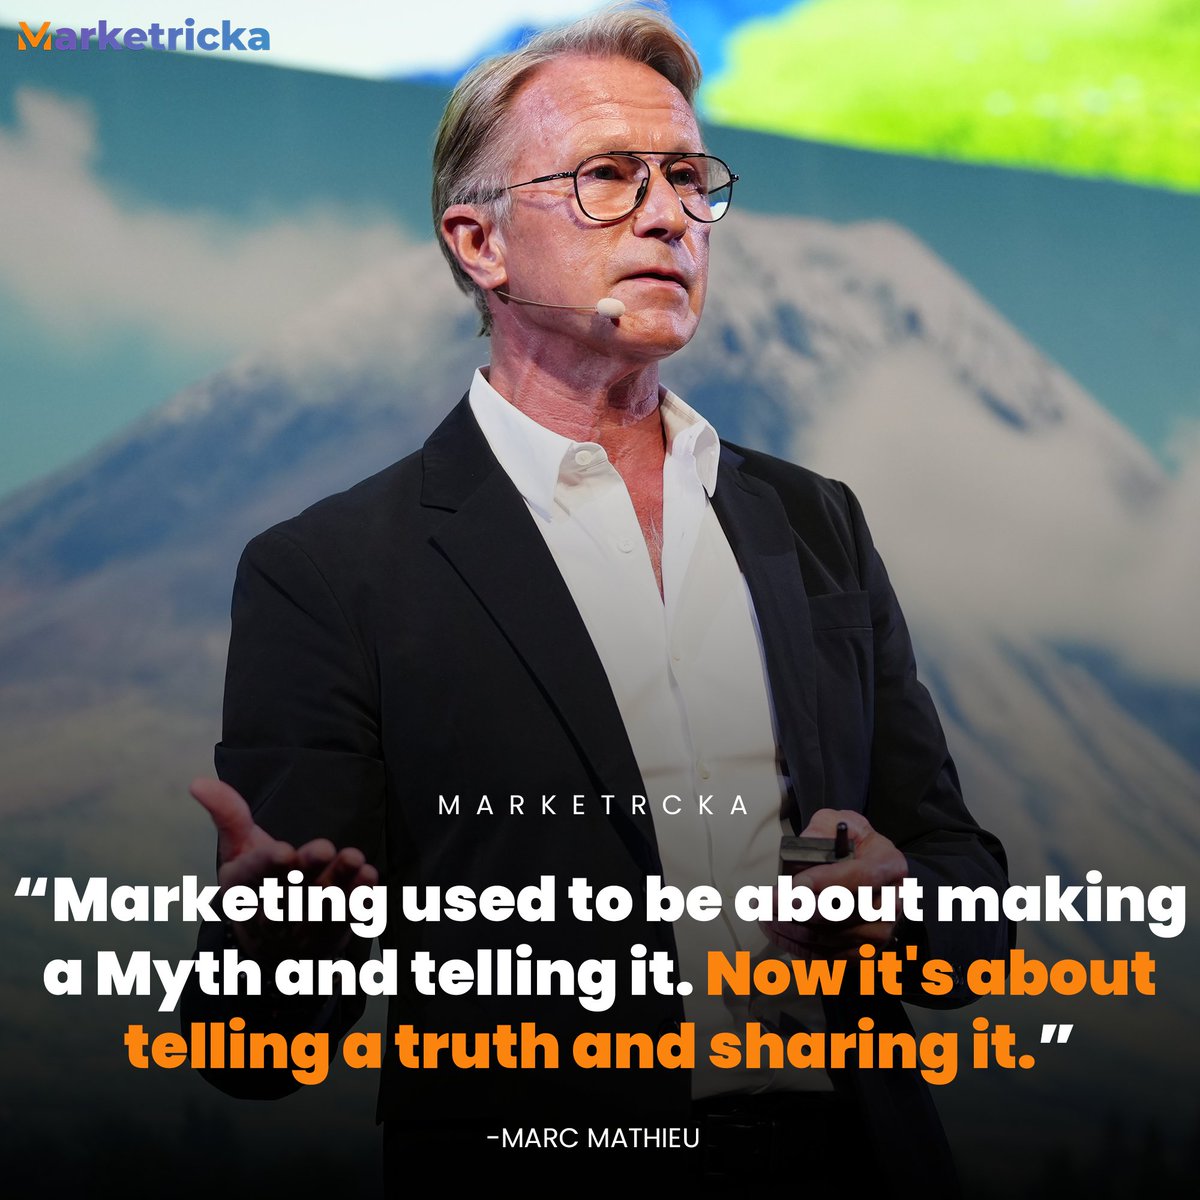 From #myths to truths: Marketing has evolved. Embrace authenticity and transparency in your brand's story.
.
.
#mythsvsfacts #MarketingDigital #DigitalMarketing #quoteoftheday #MarketInsights #MarketingStrategy #MarketingTips #MarketingSuccess #marketricka #BRAND #MarketUpdate